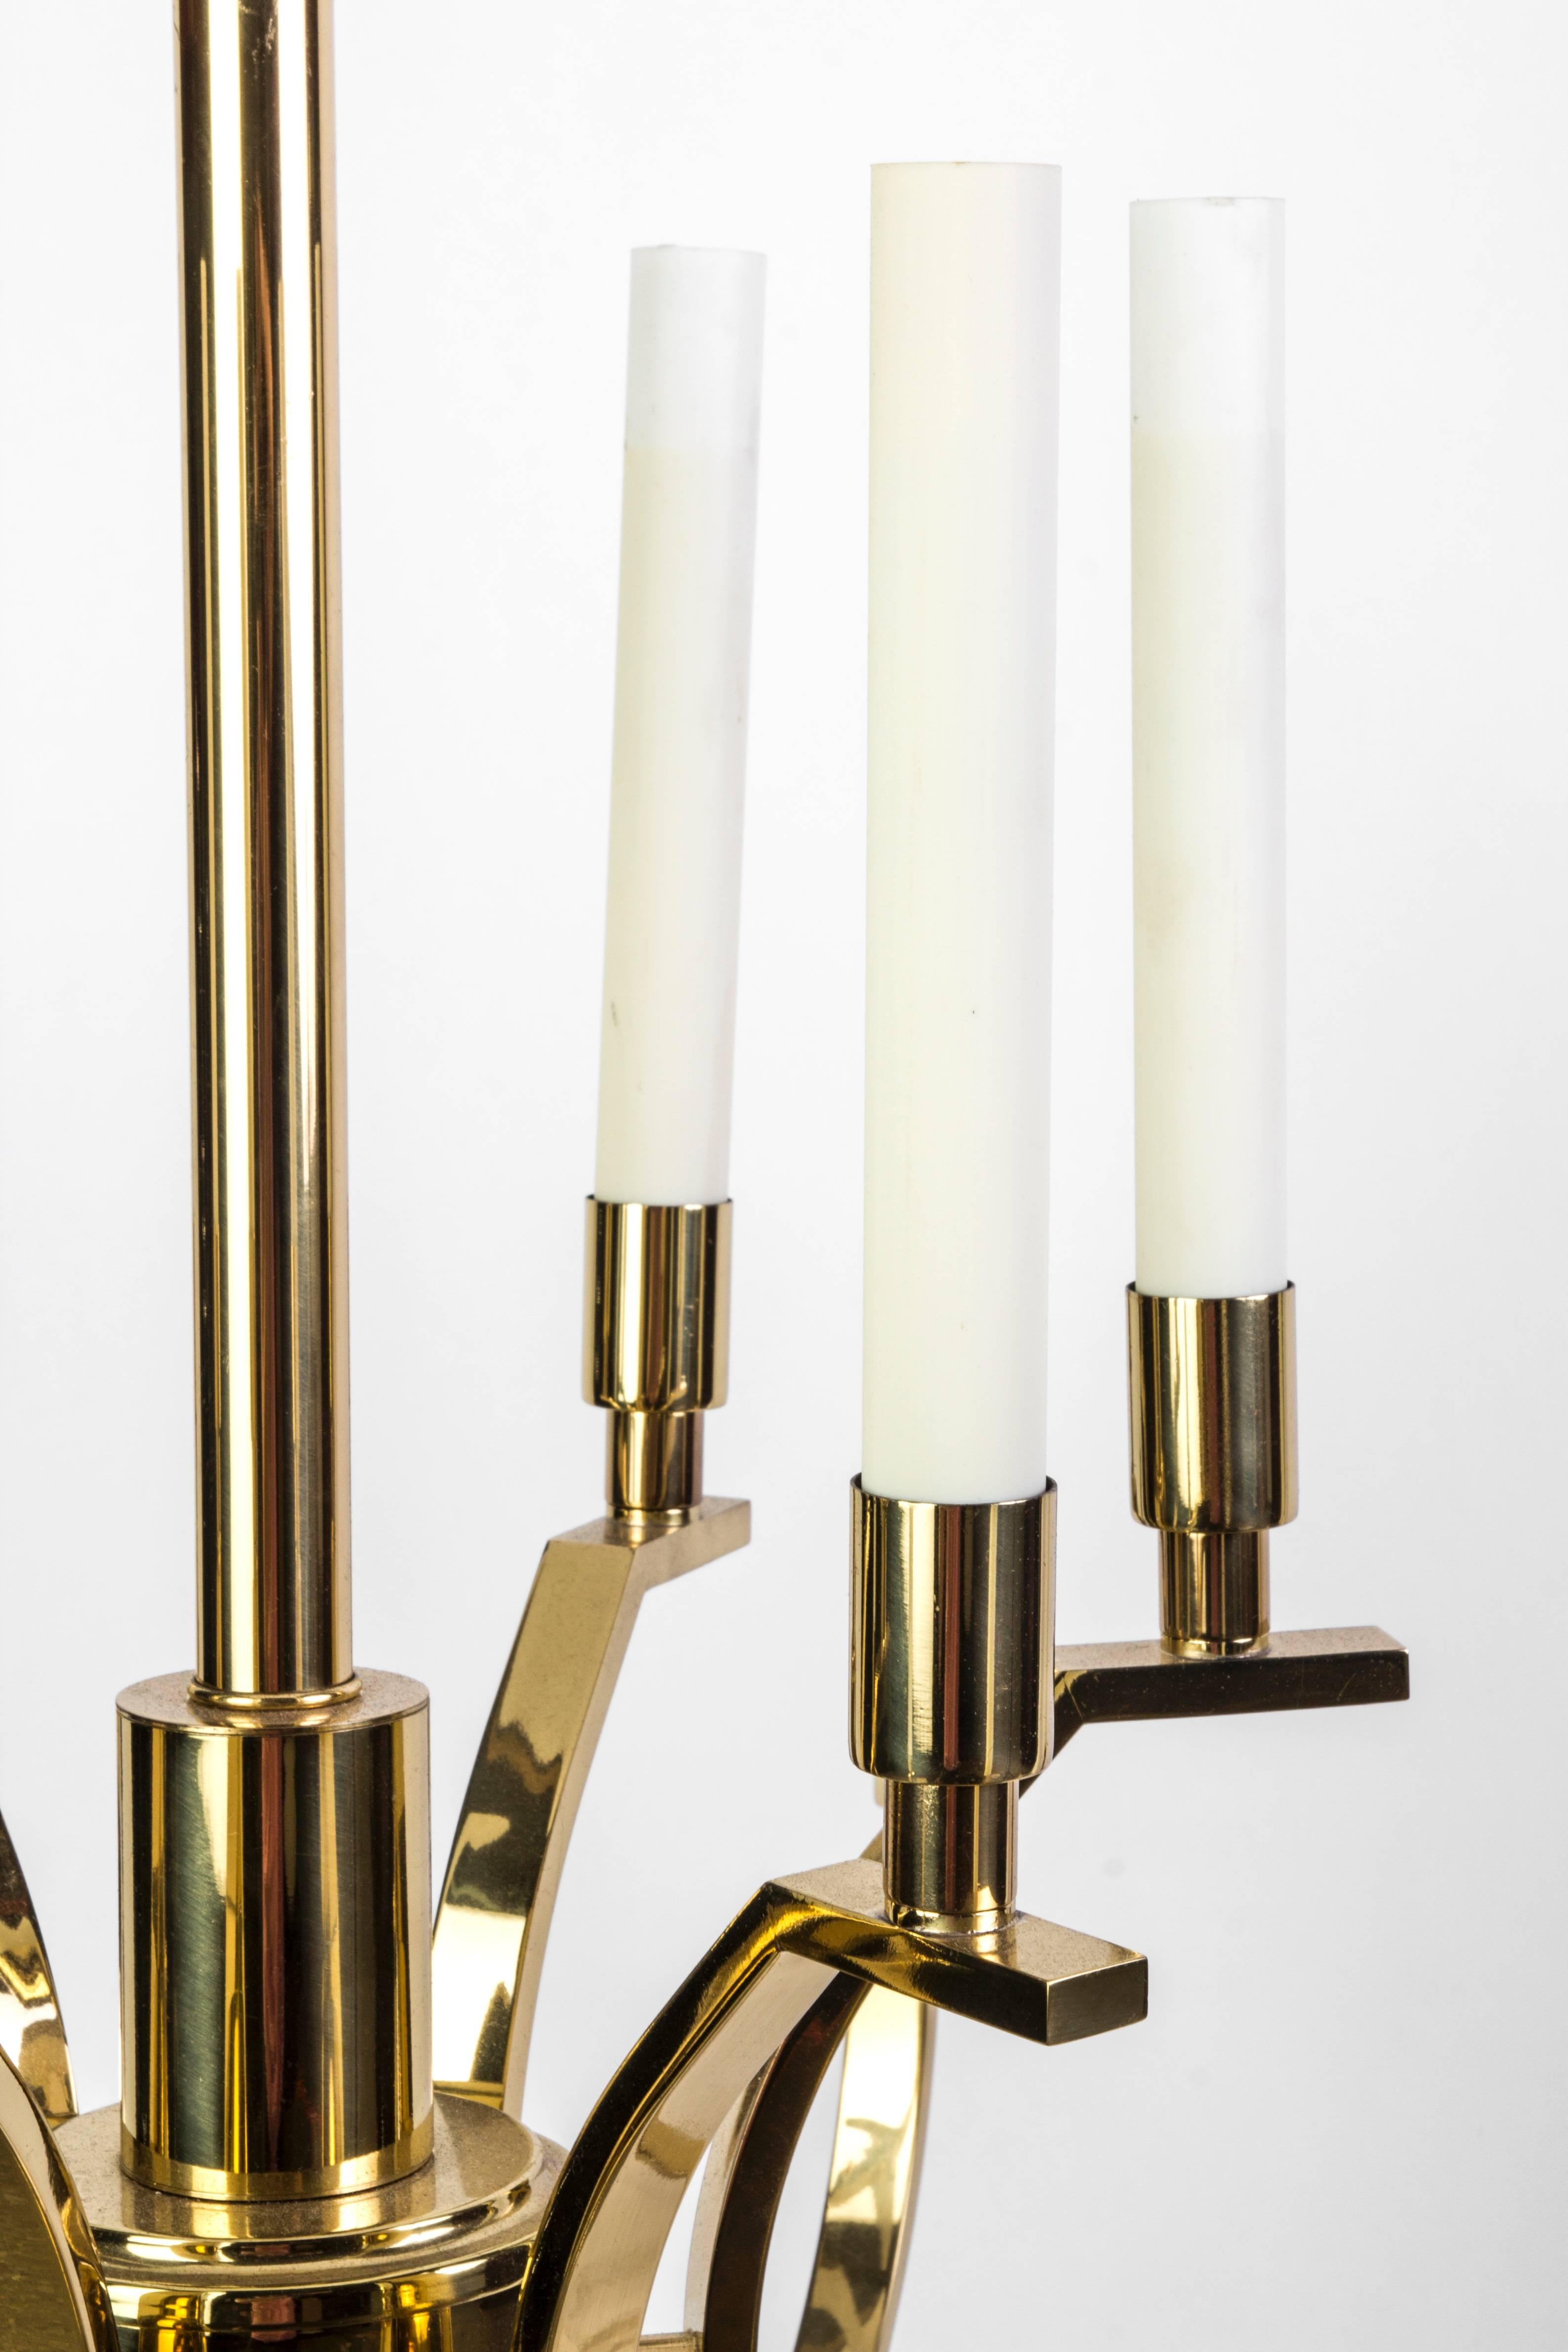 American Exquisite Mid-Century Modernist Candelabra Chandelier by Frederick Cooper For Sale